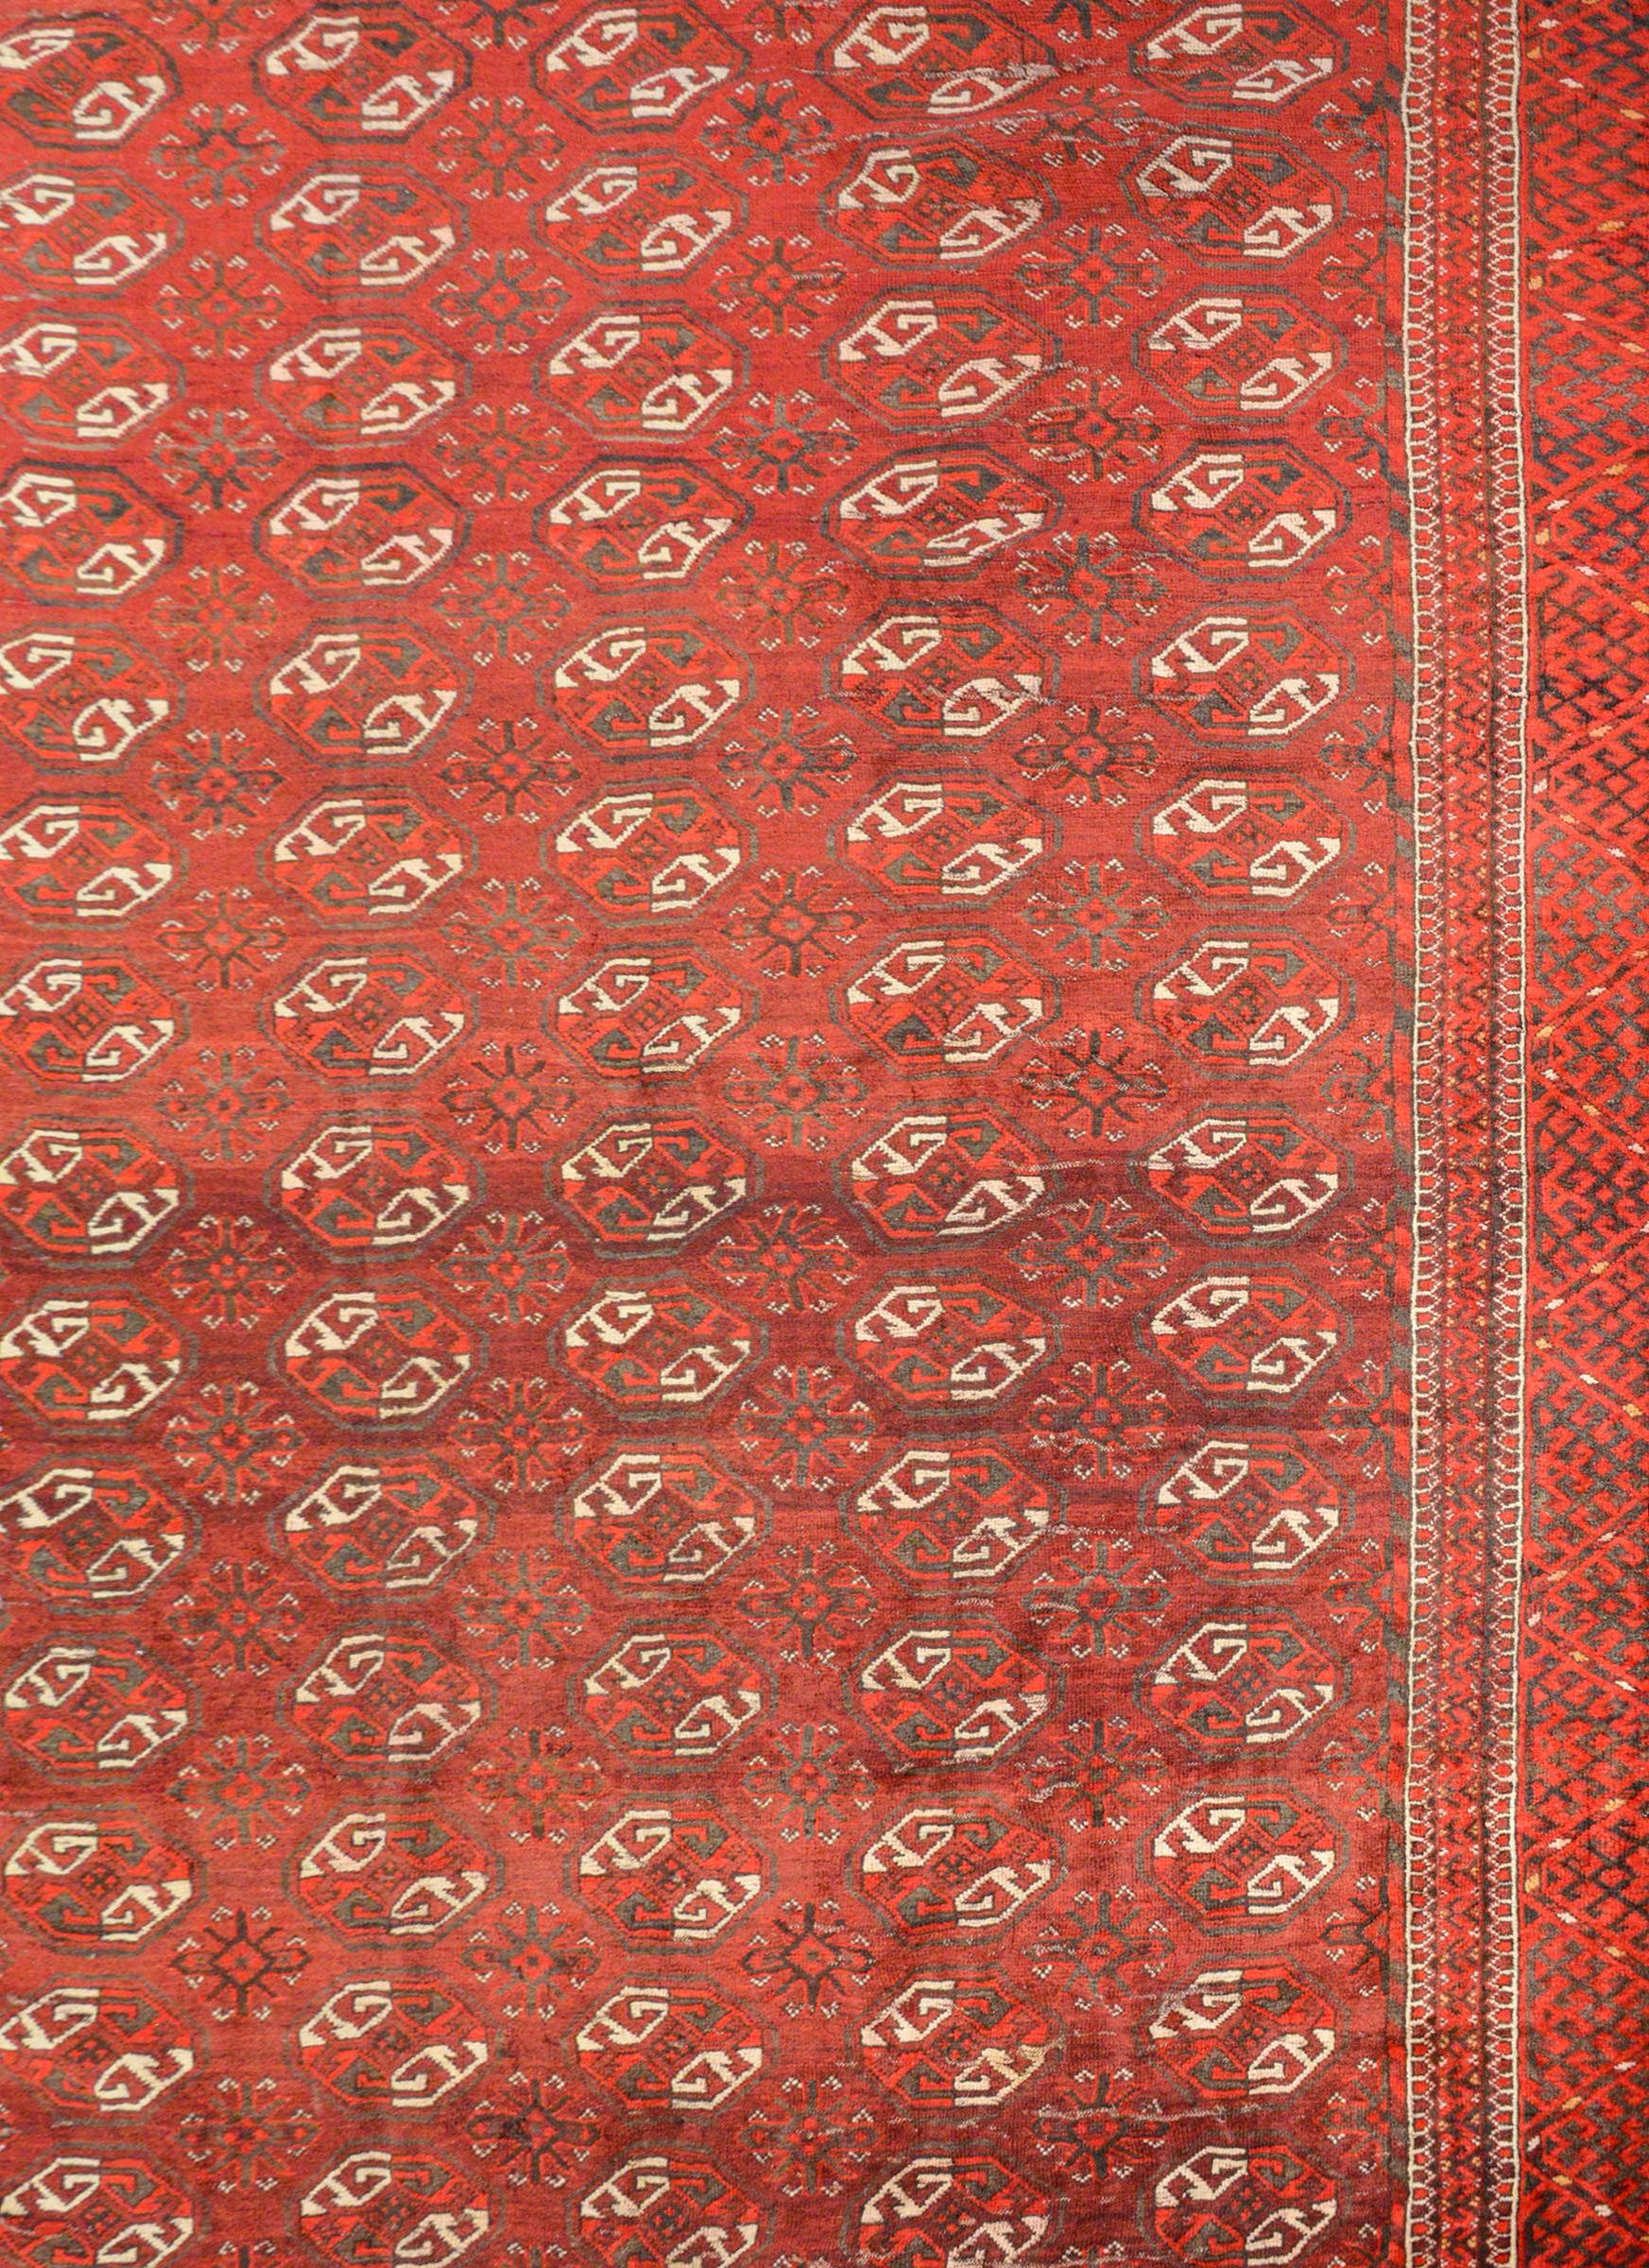 Vegetable Dyed Wonderful Early 20th Century Turkomen Rug For Sale